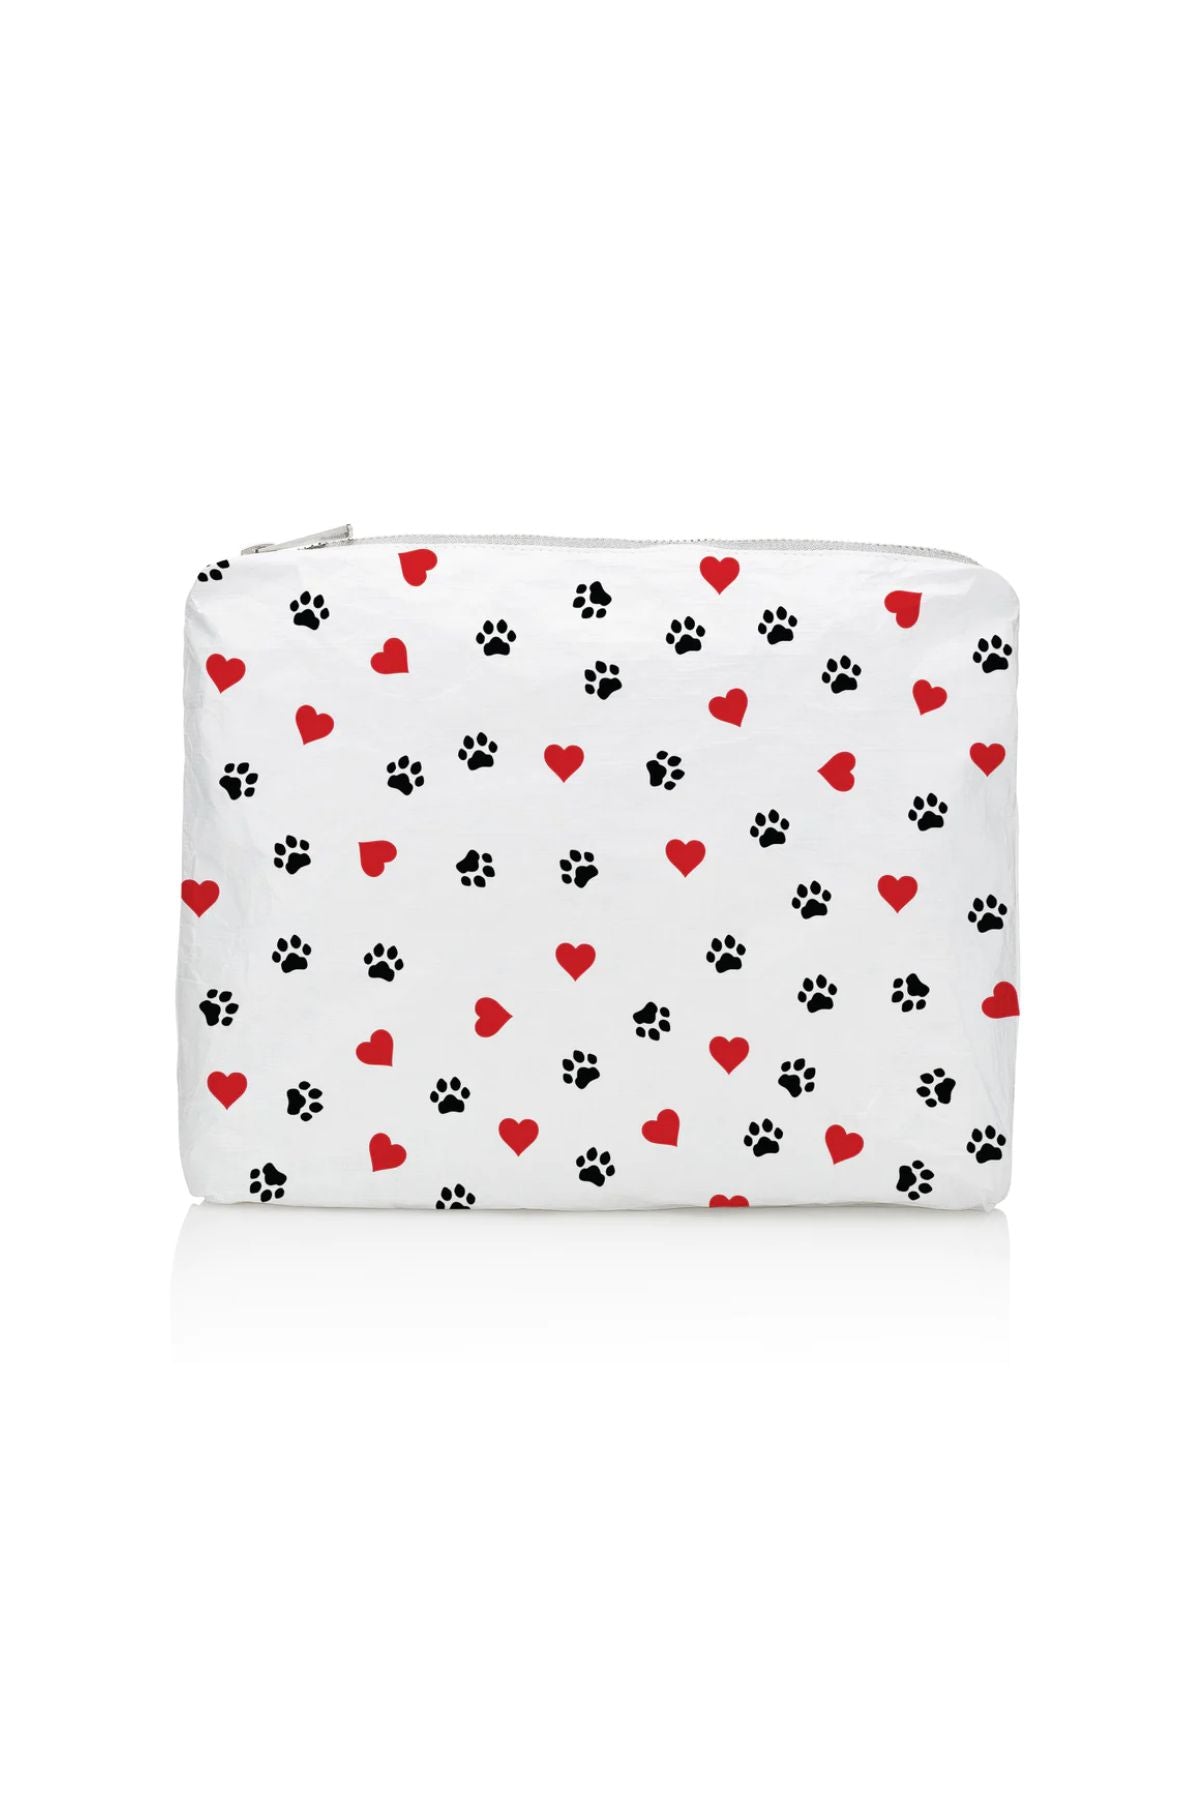 Travel pack with hearts and paws